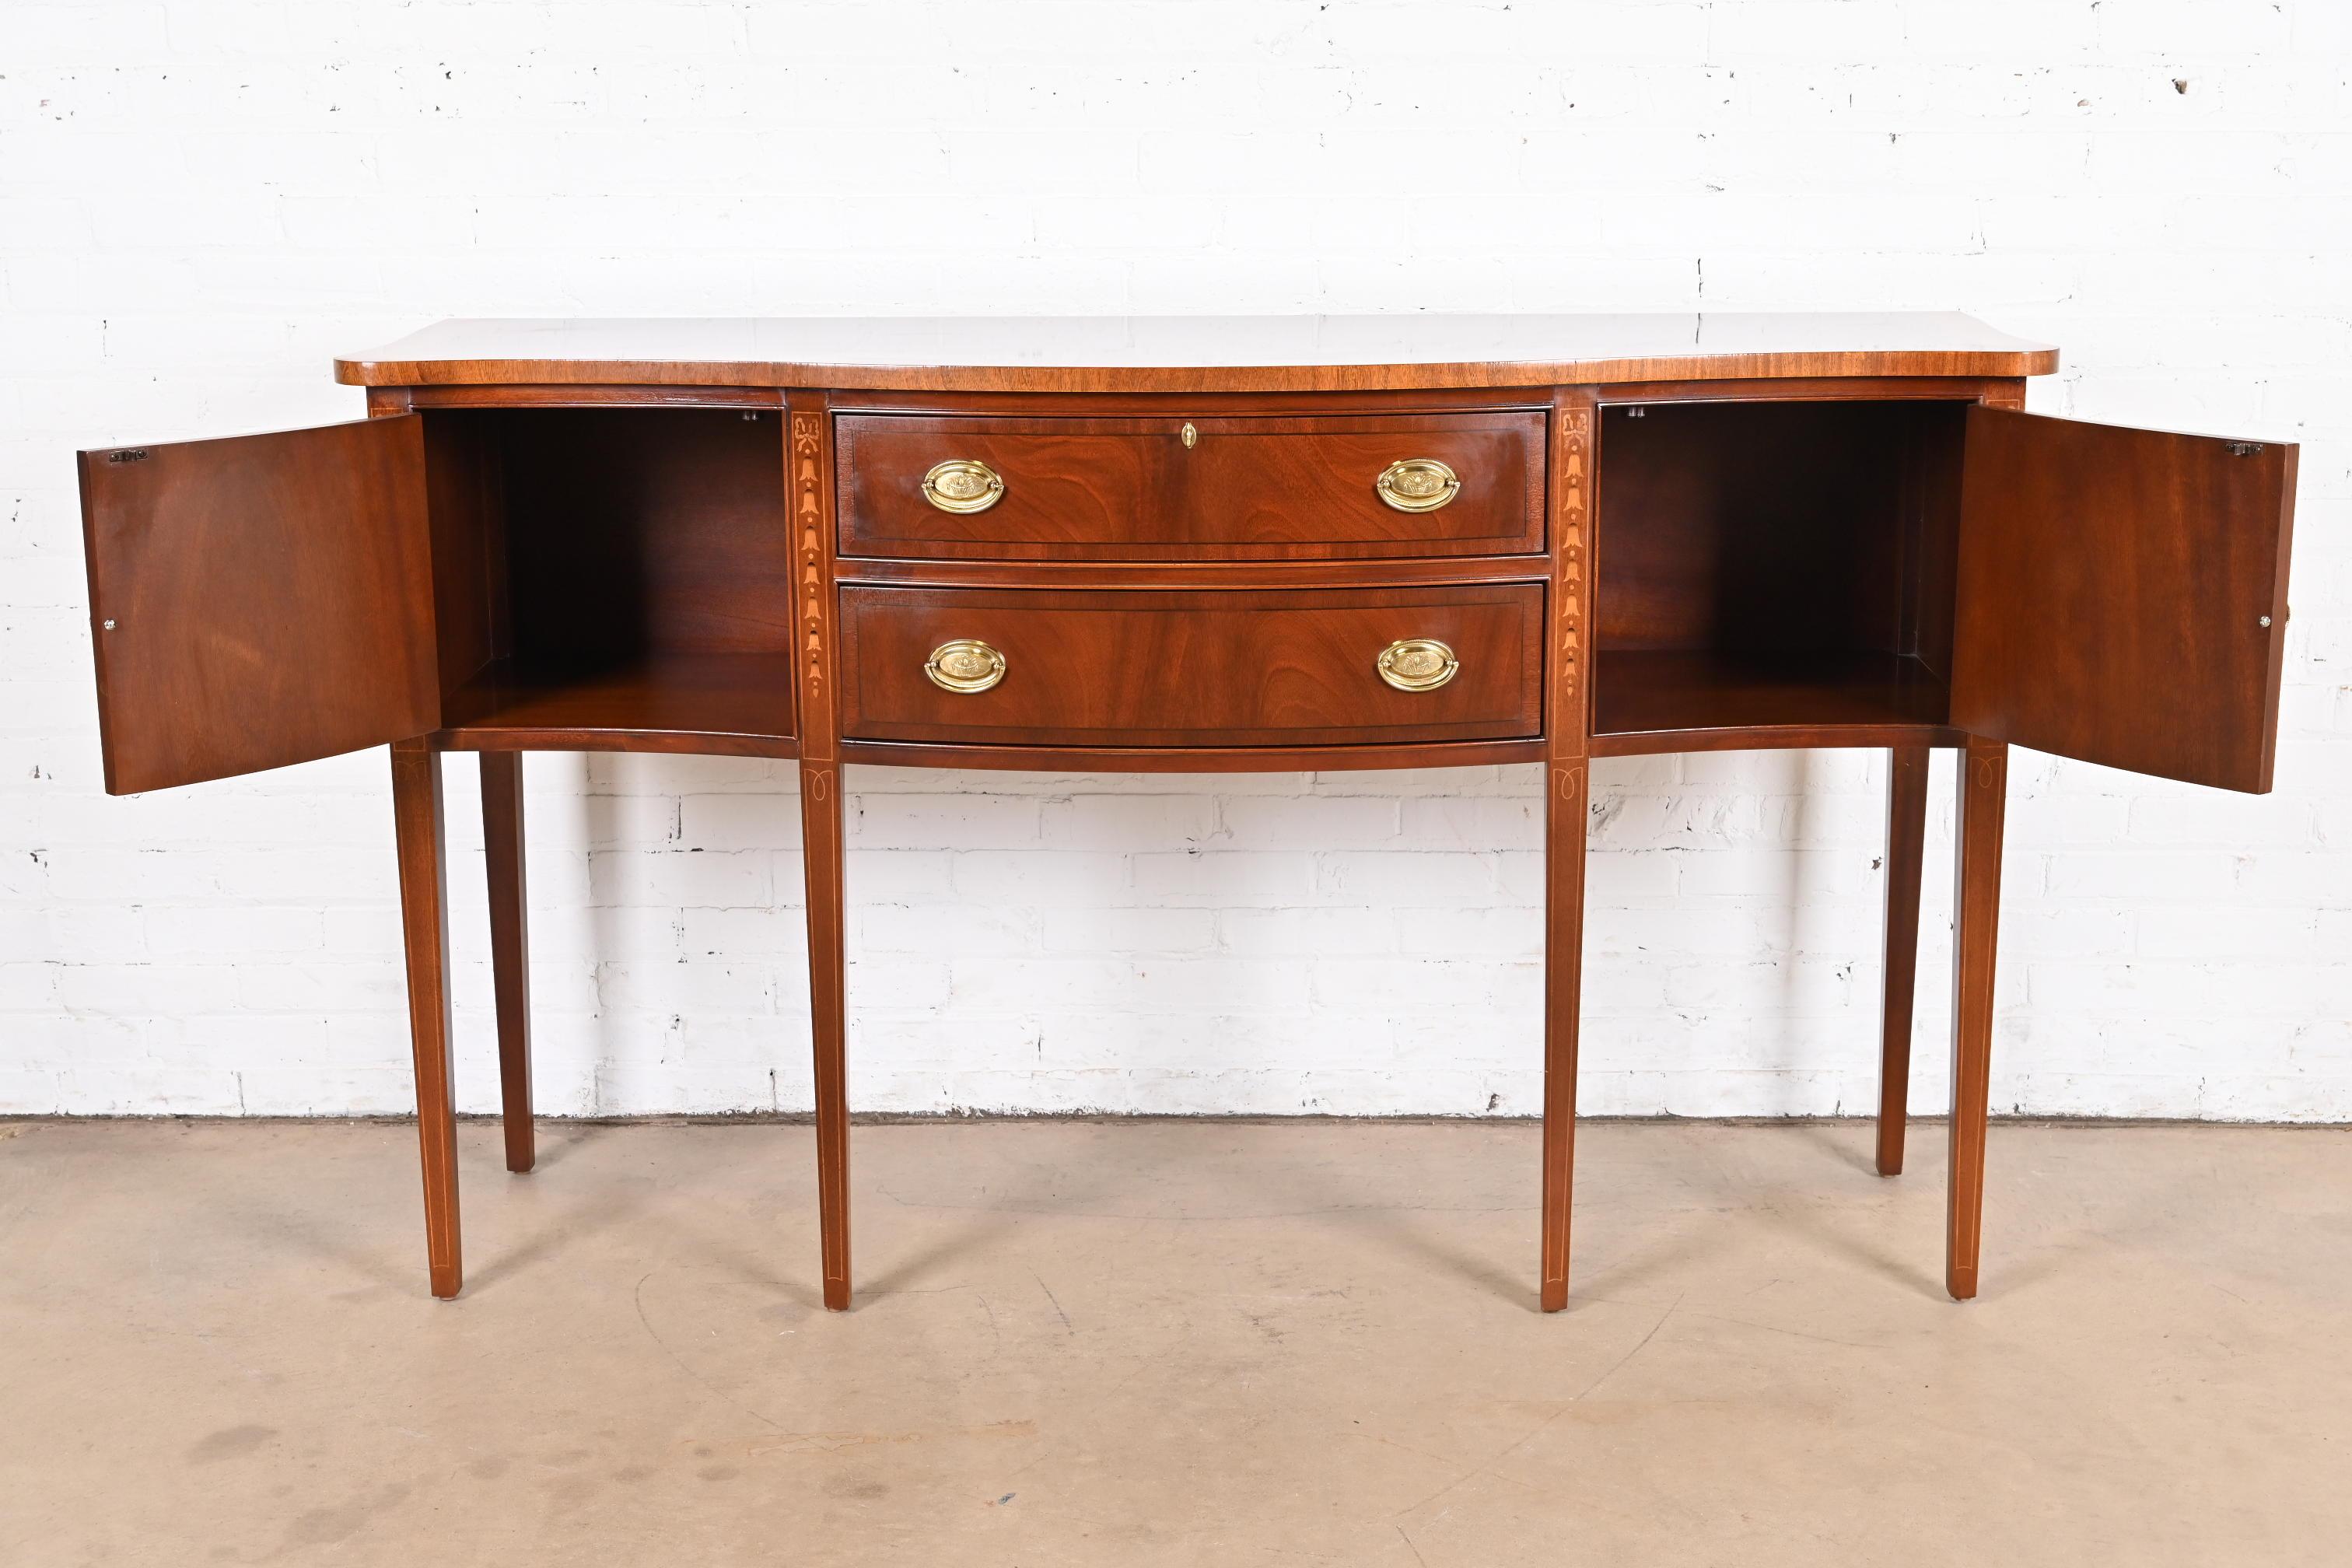 Hepplewhite Inlaid Mahogany Serpentine Front Sideboard Credenza For Sale 2